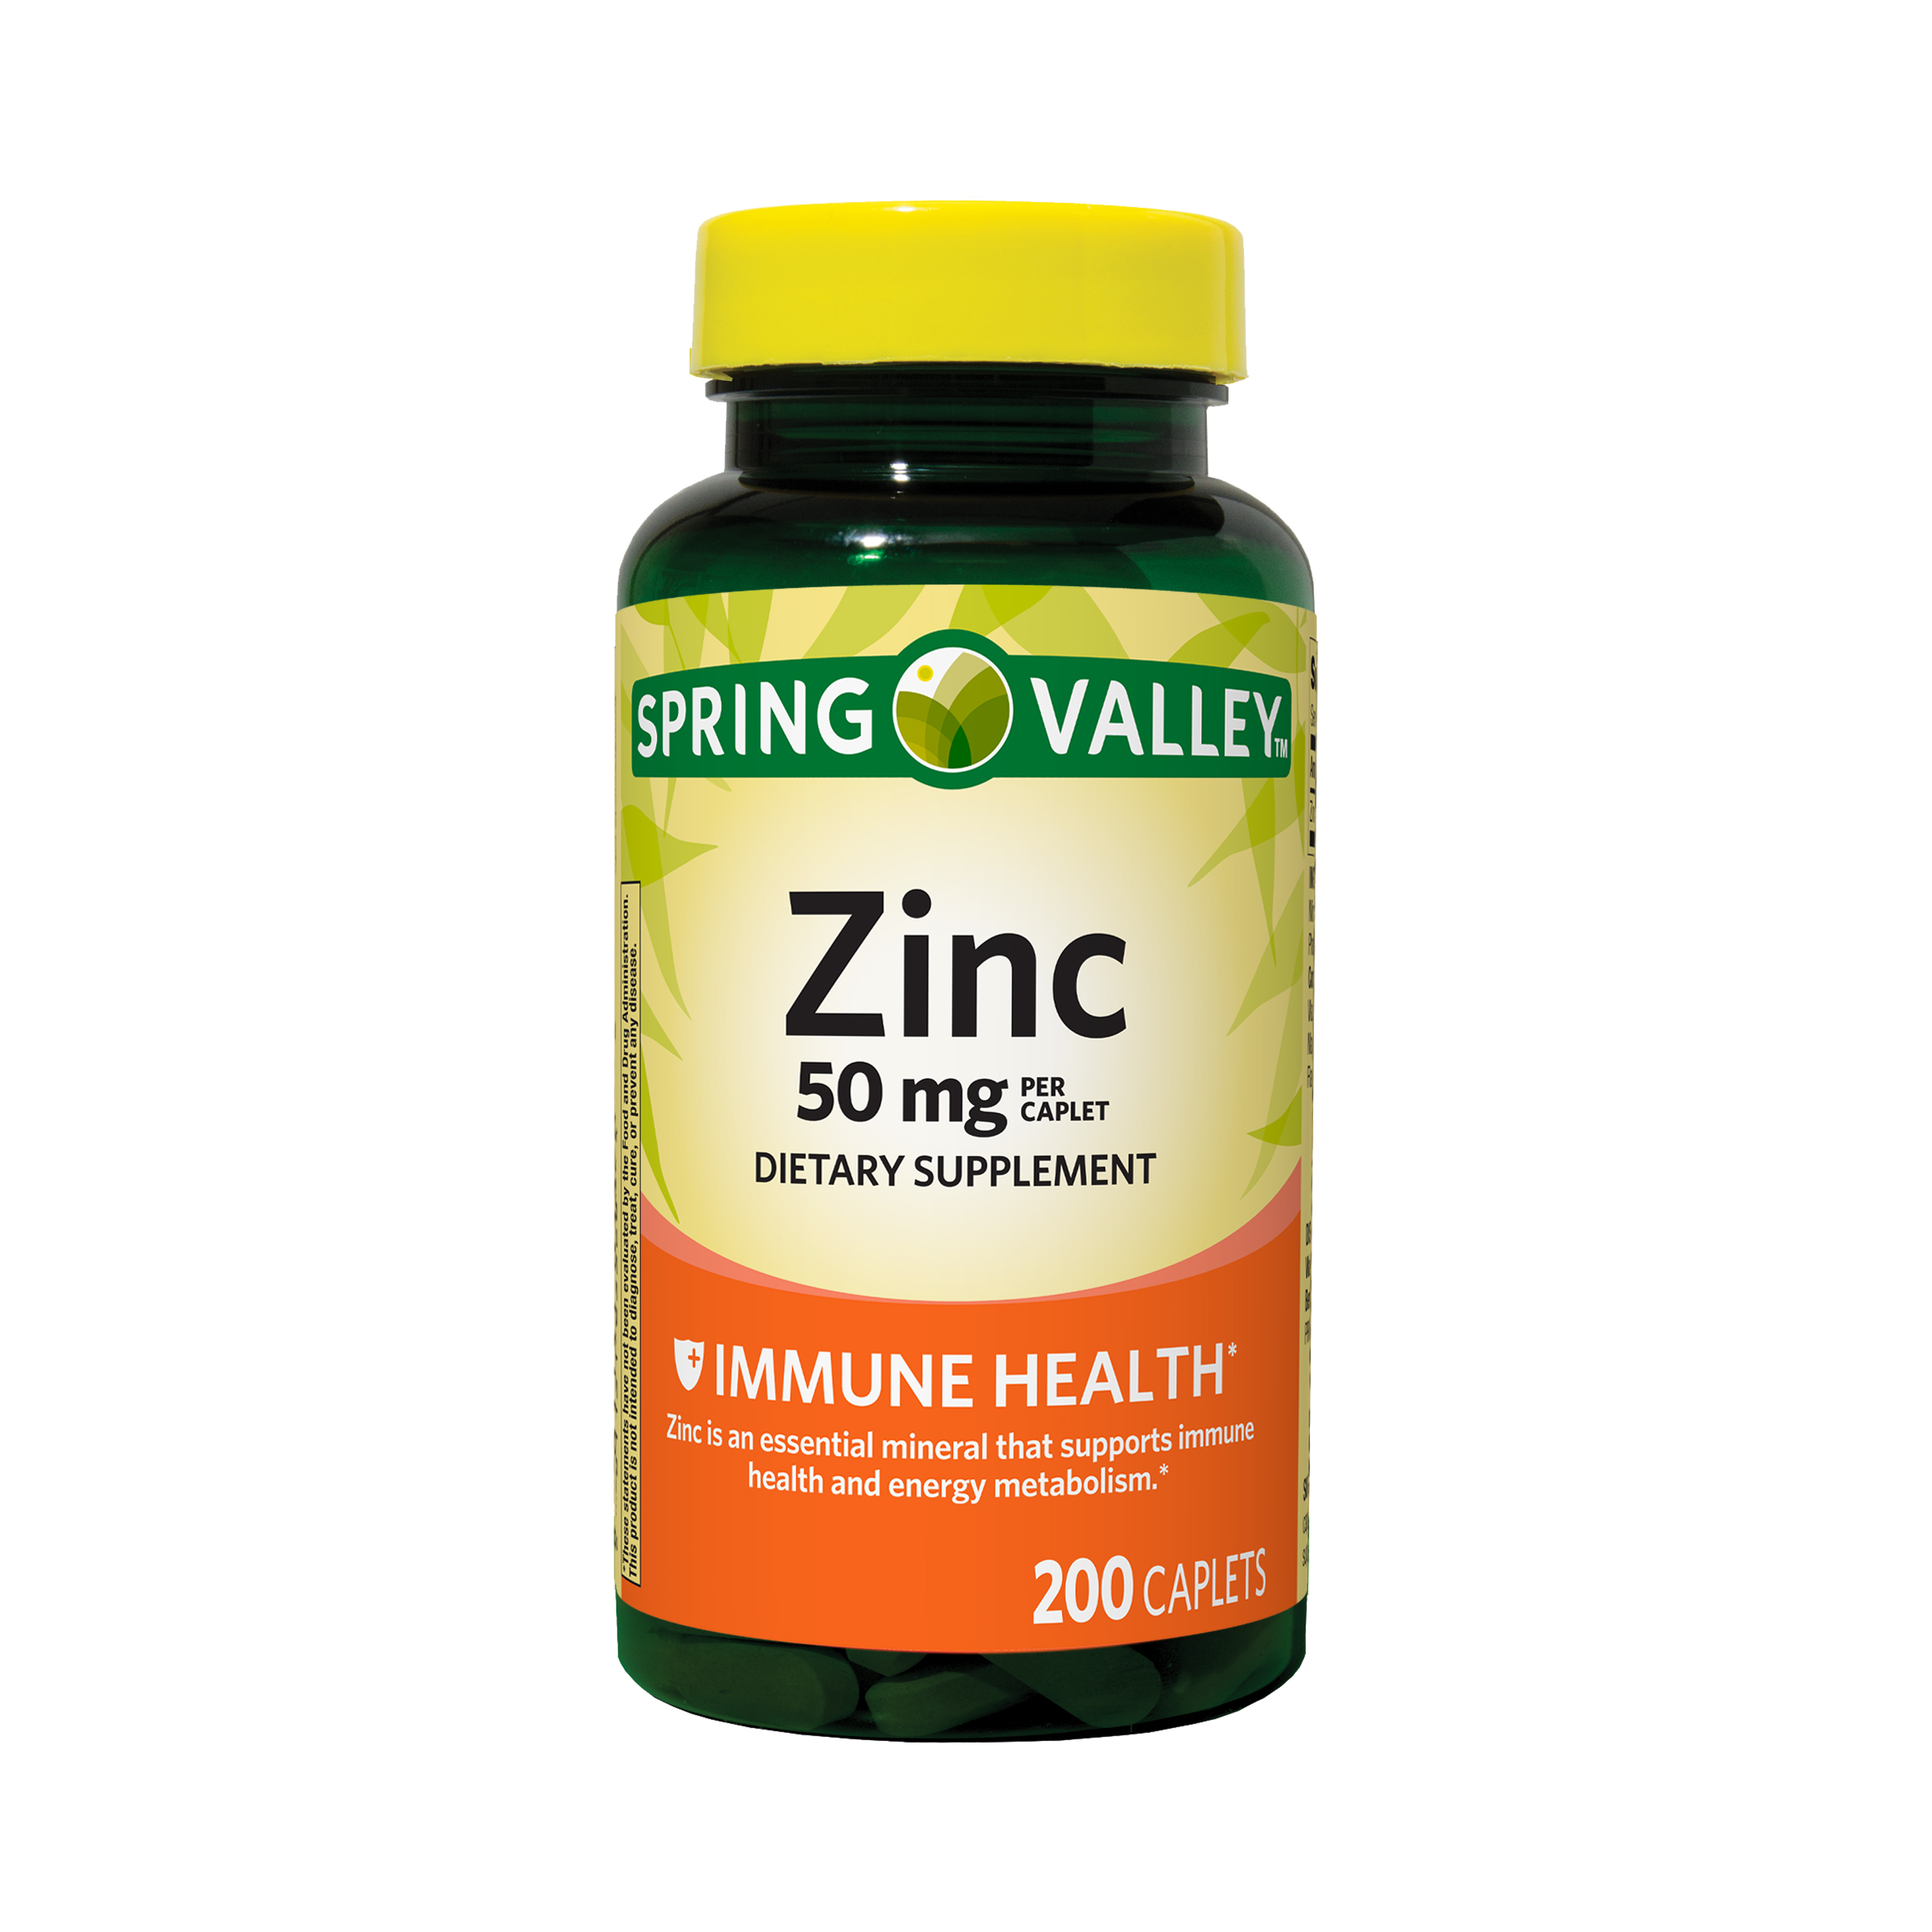 Spring Valley Zinc Immune Health Dietary Supplement Caplets, 50 mg, 200 Count - image 1 of 5